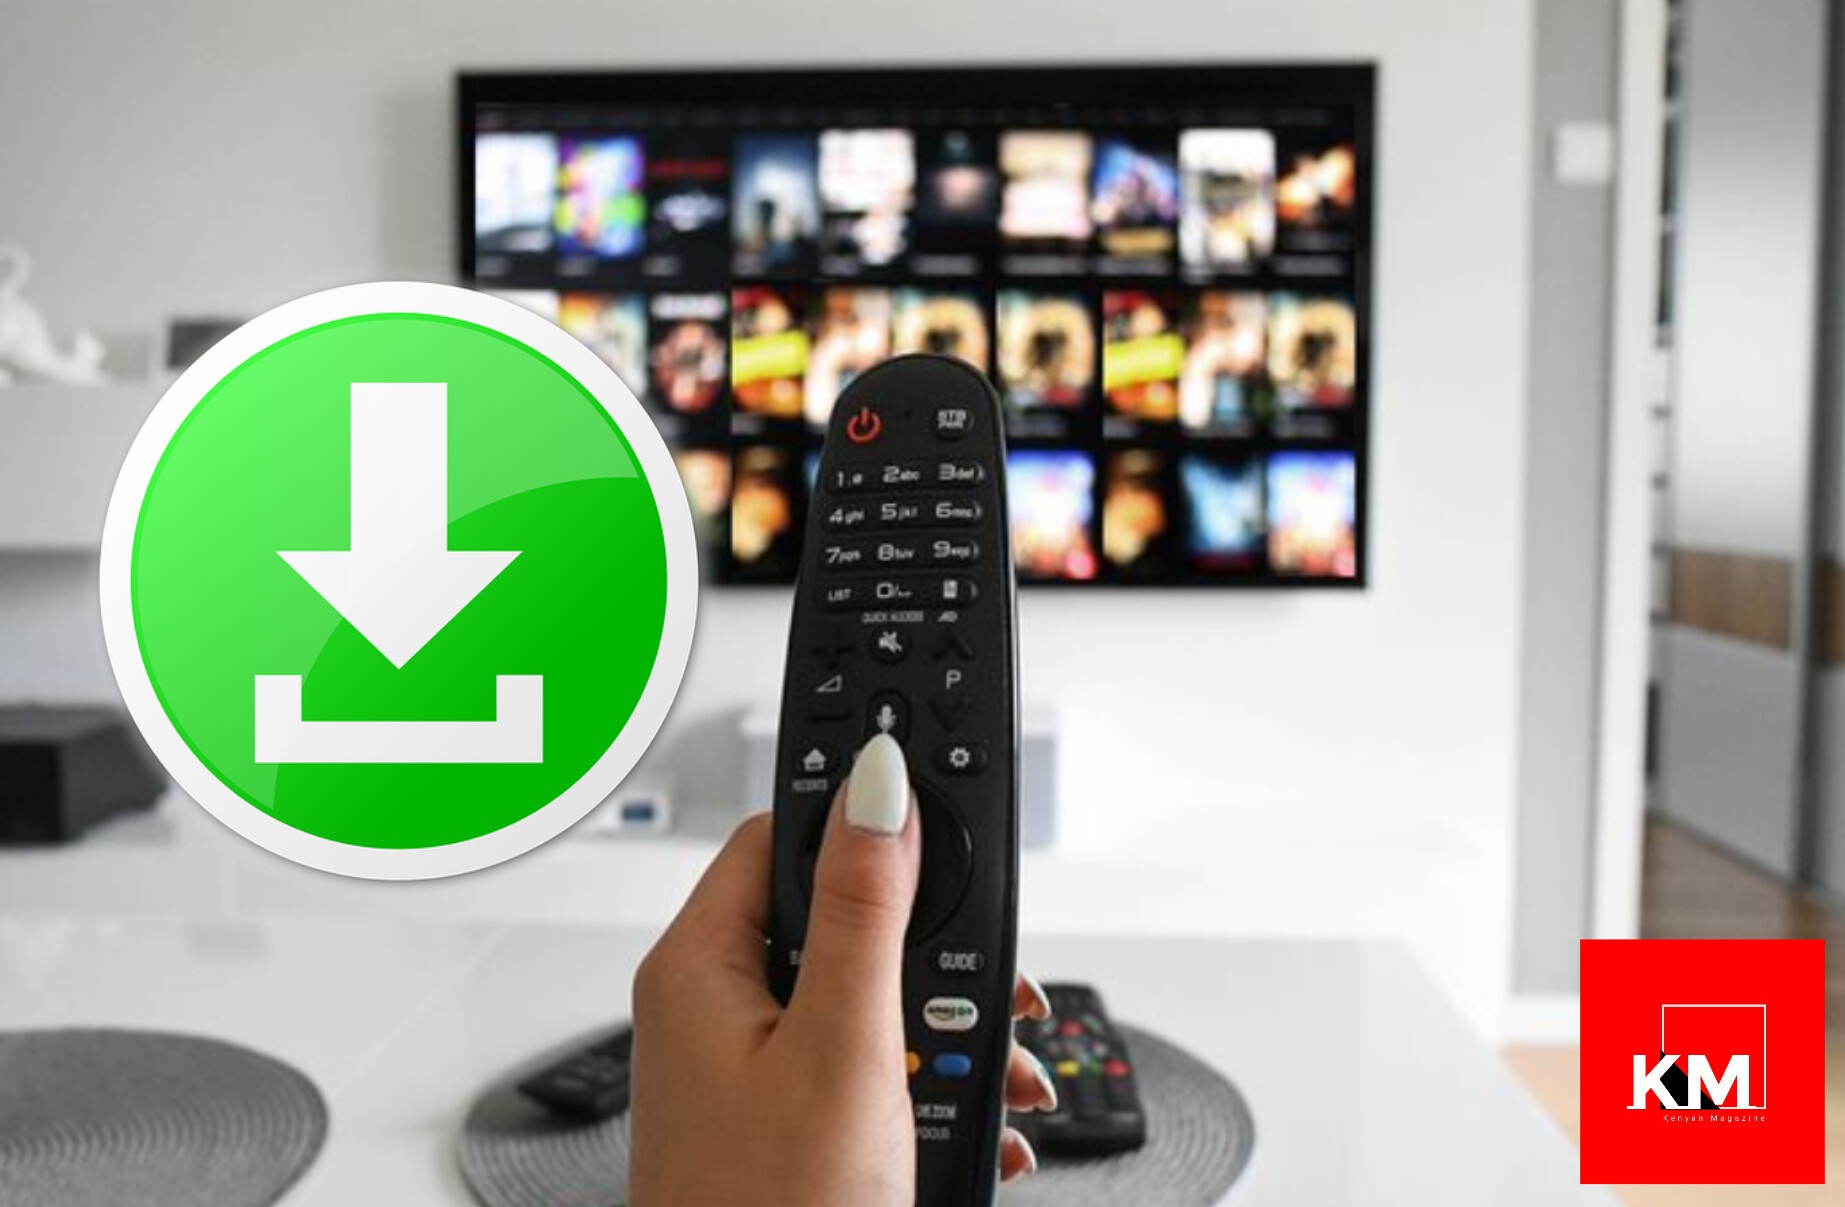 Best download sites for TV shows